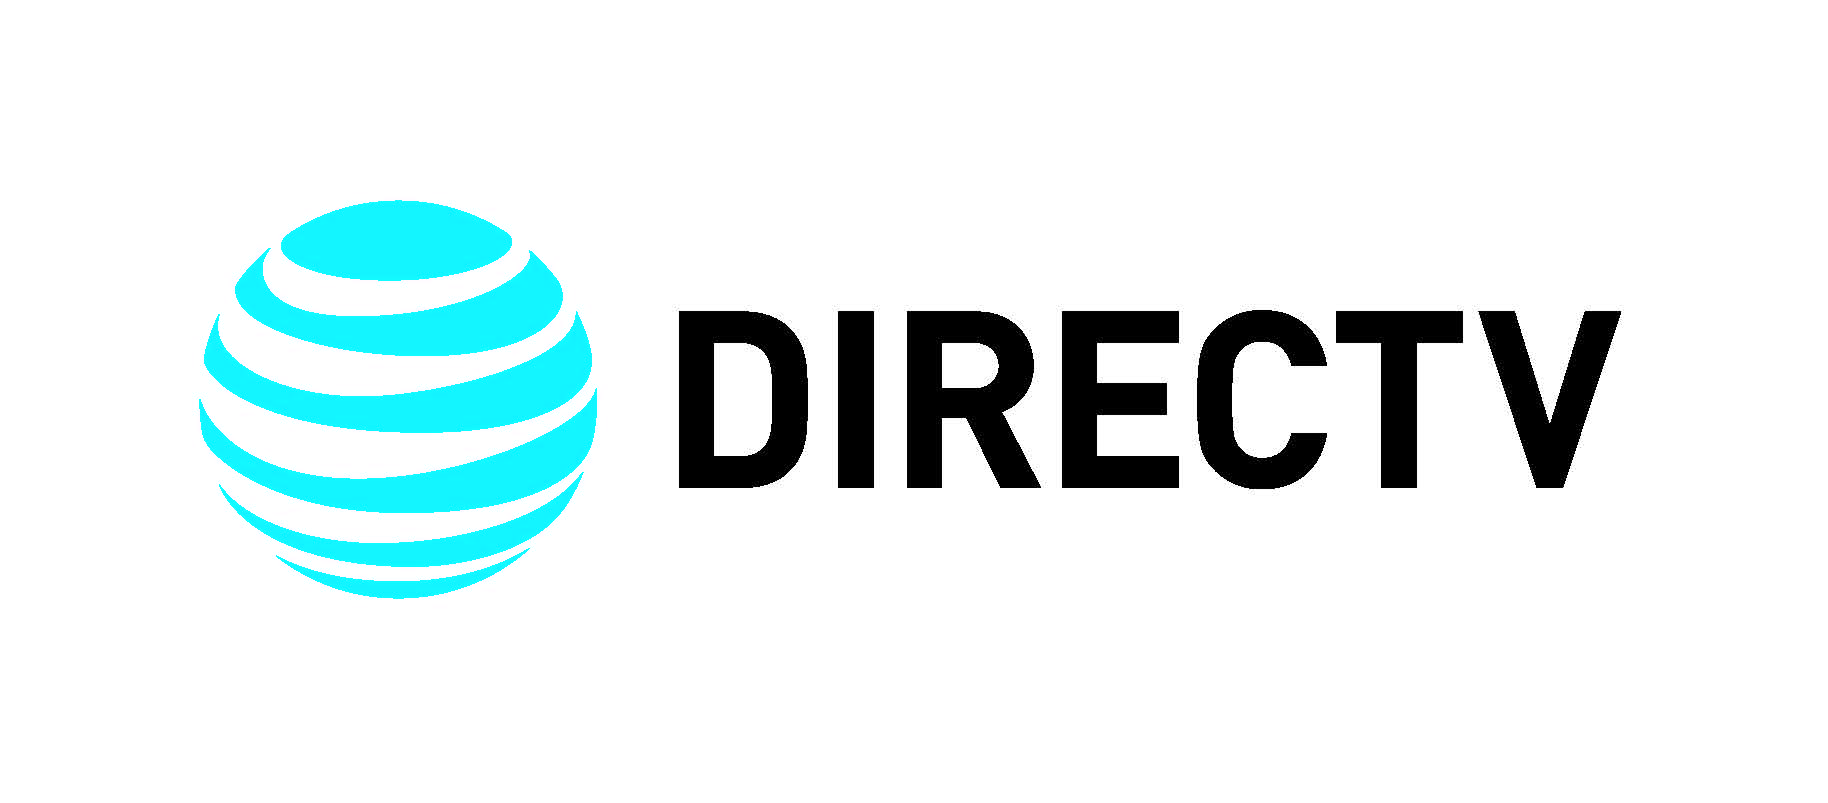 AT&T Direct TV